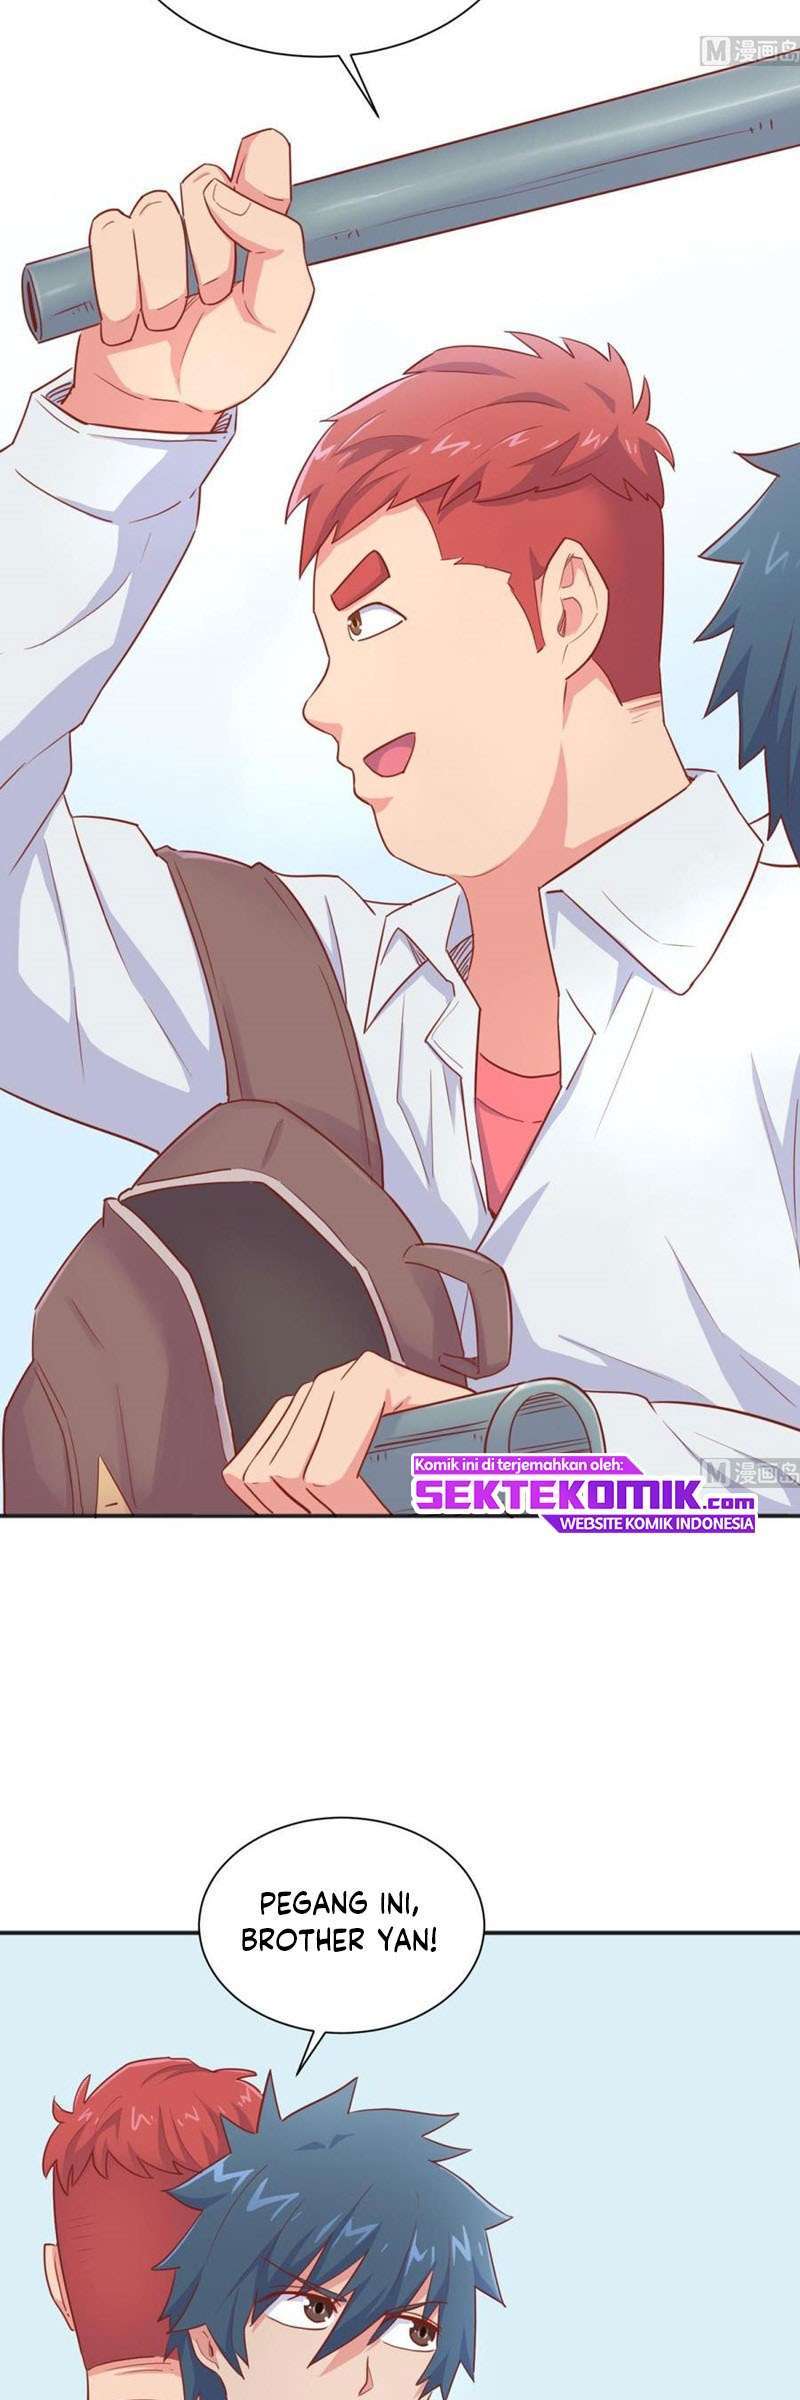 Goddess’s Personal Doctor Chapter 21